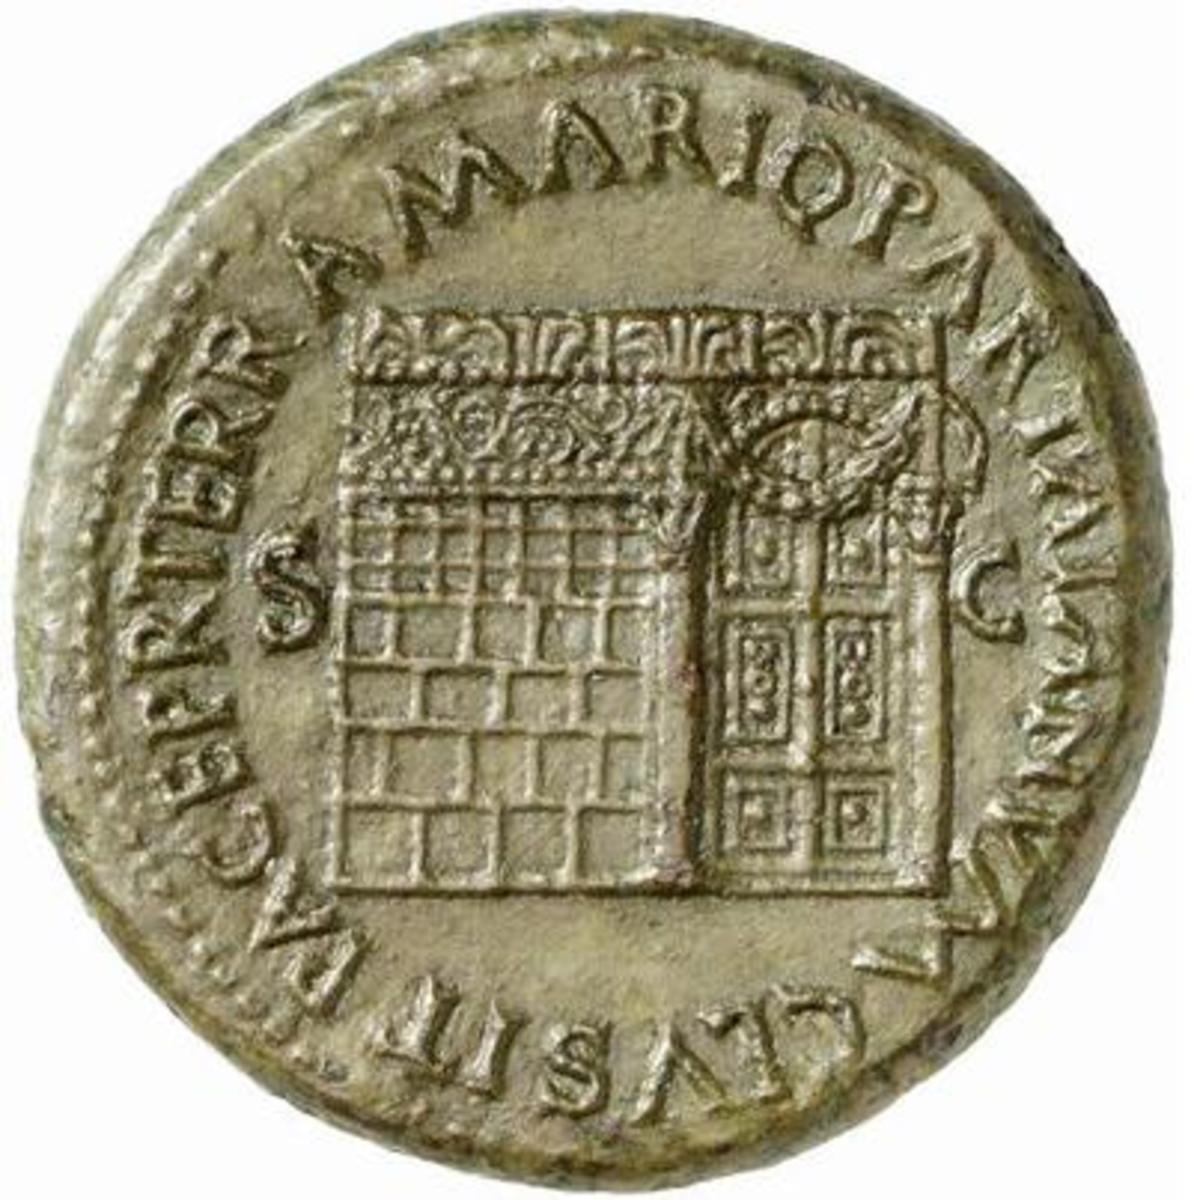 First century AD Roman coin depicting the doors to the temple of Janus.